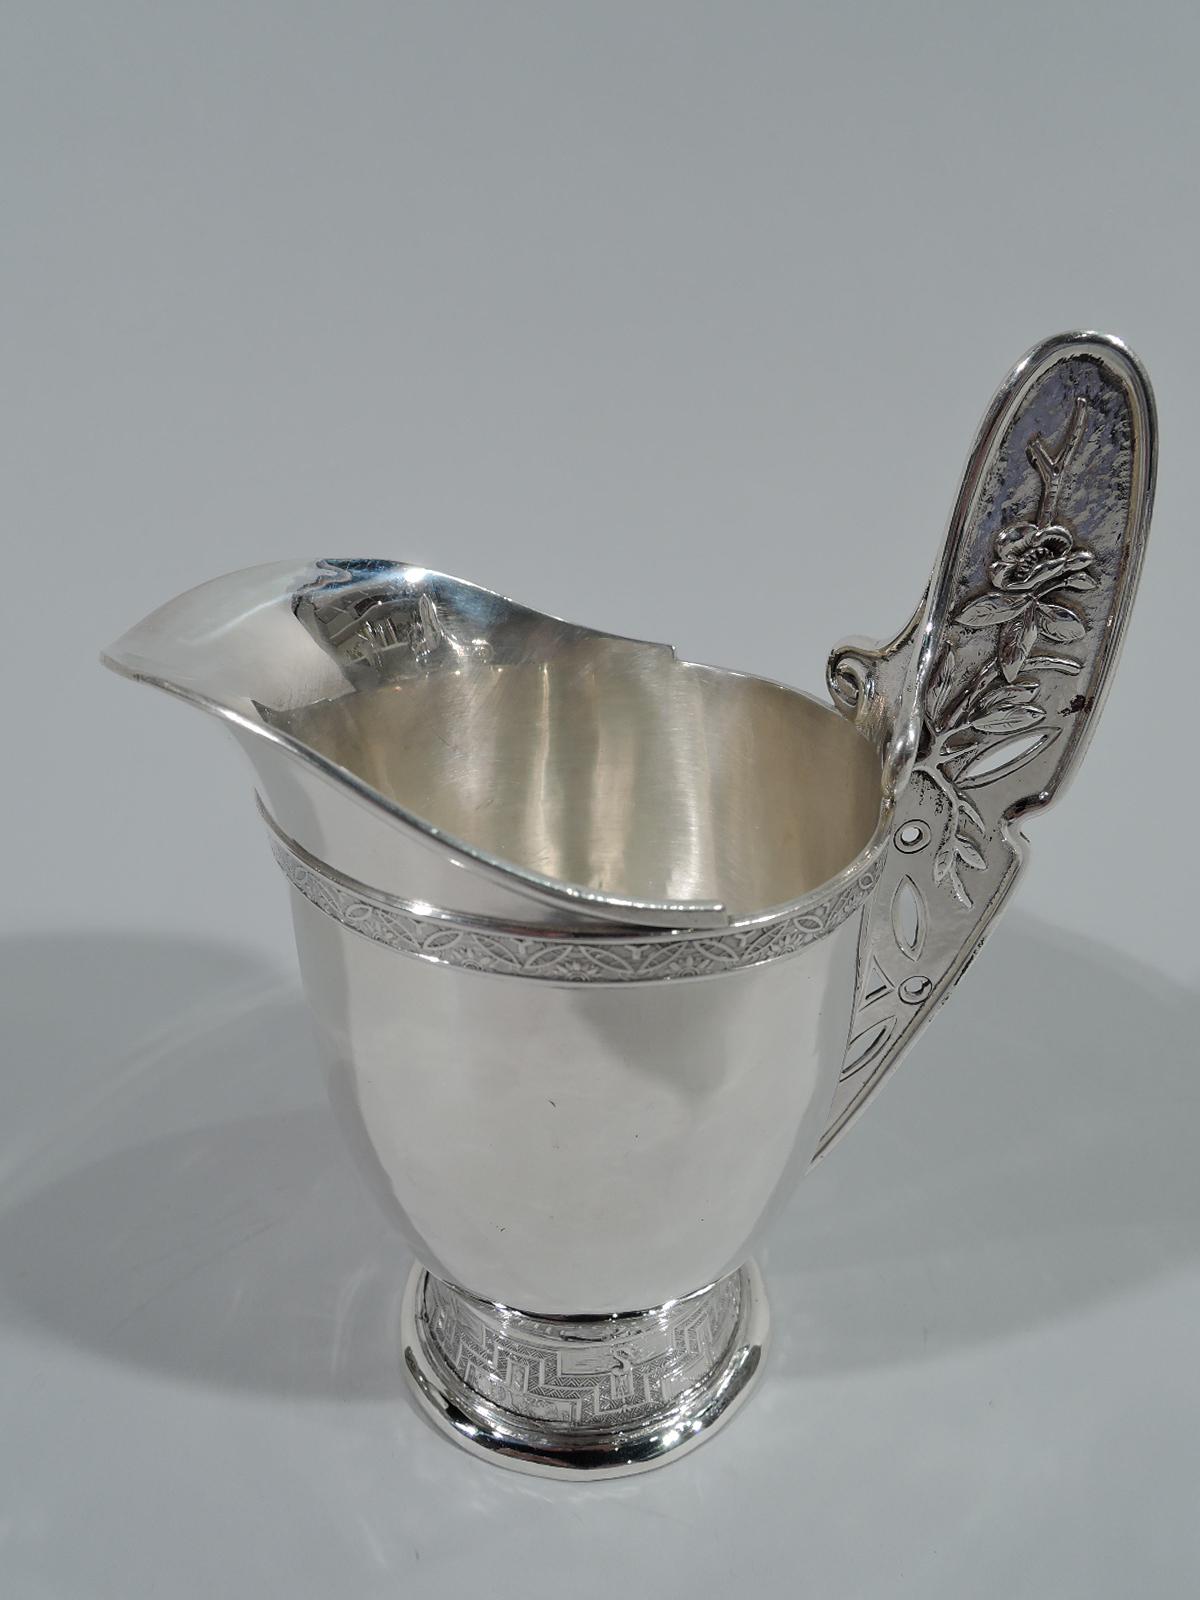 Japonesque sterling silver creamer and sugar. Made by Tiffany & Co. in New York. Each: Curved and tapering bowl on raised and spread foot decorated with fretwork, cranes, and blossoming branches. Flat and tall fan-form handles with volute scrolls